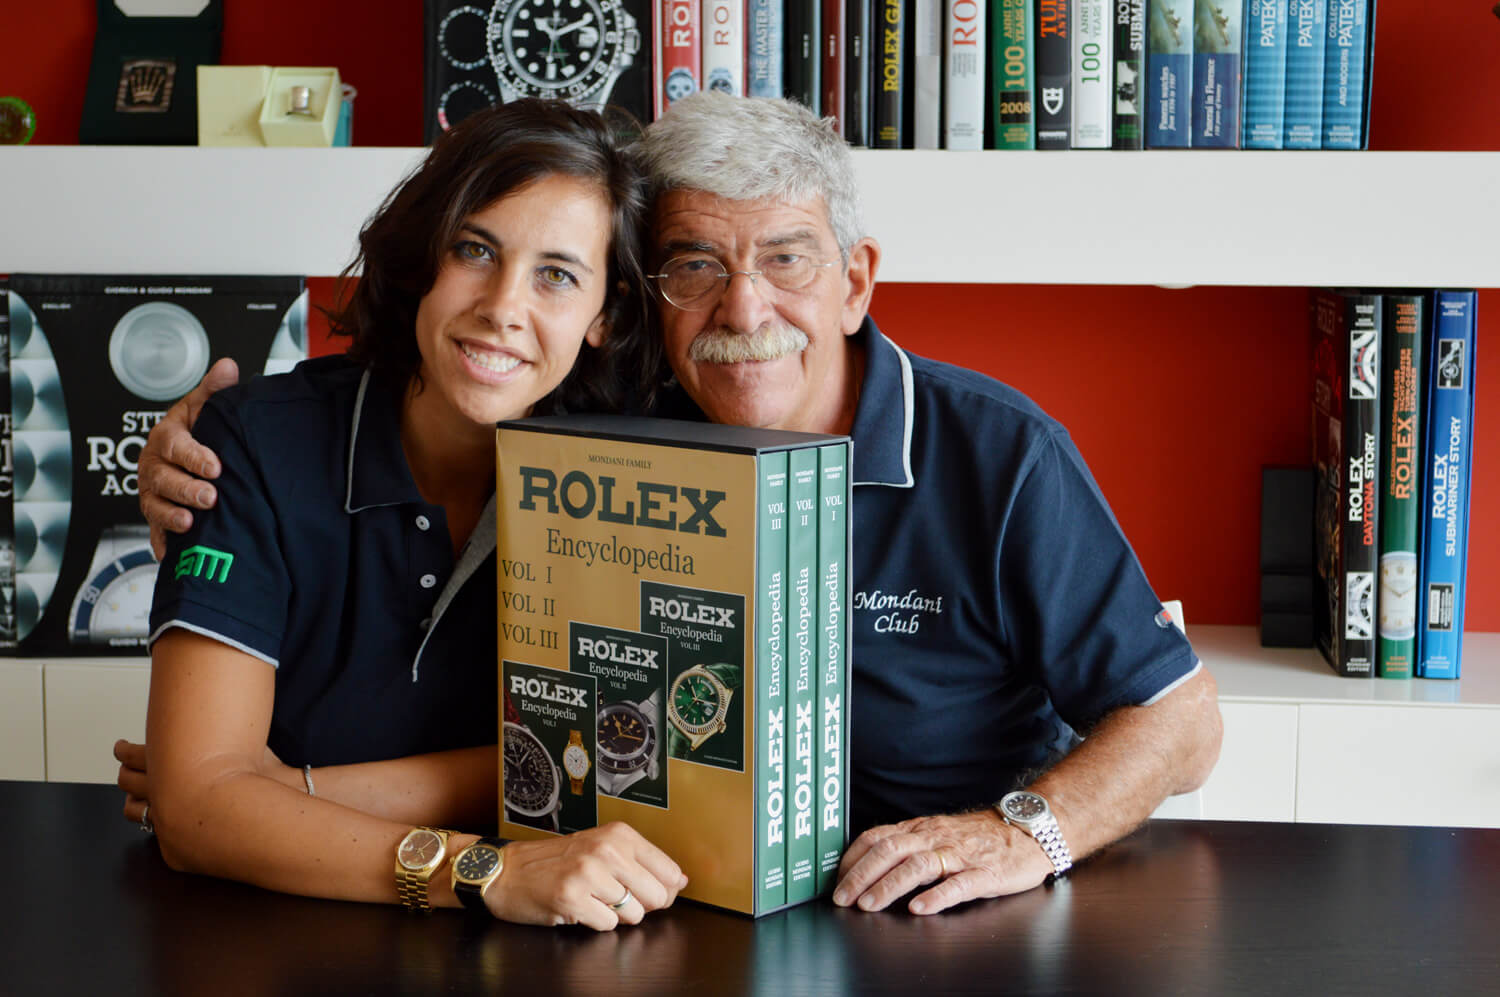 Giorgia and Guido Mondani Sport Watches as they Display The Rolex Encyclopedia in front of a Bookshelf.